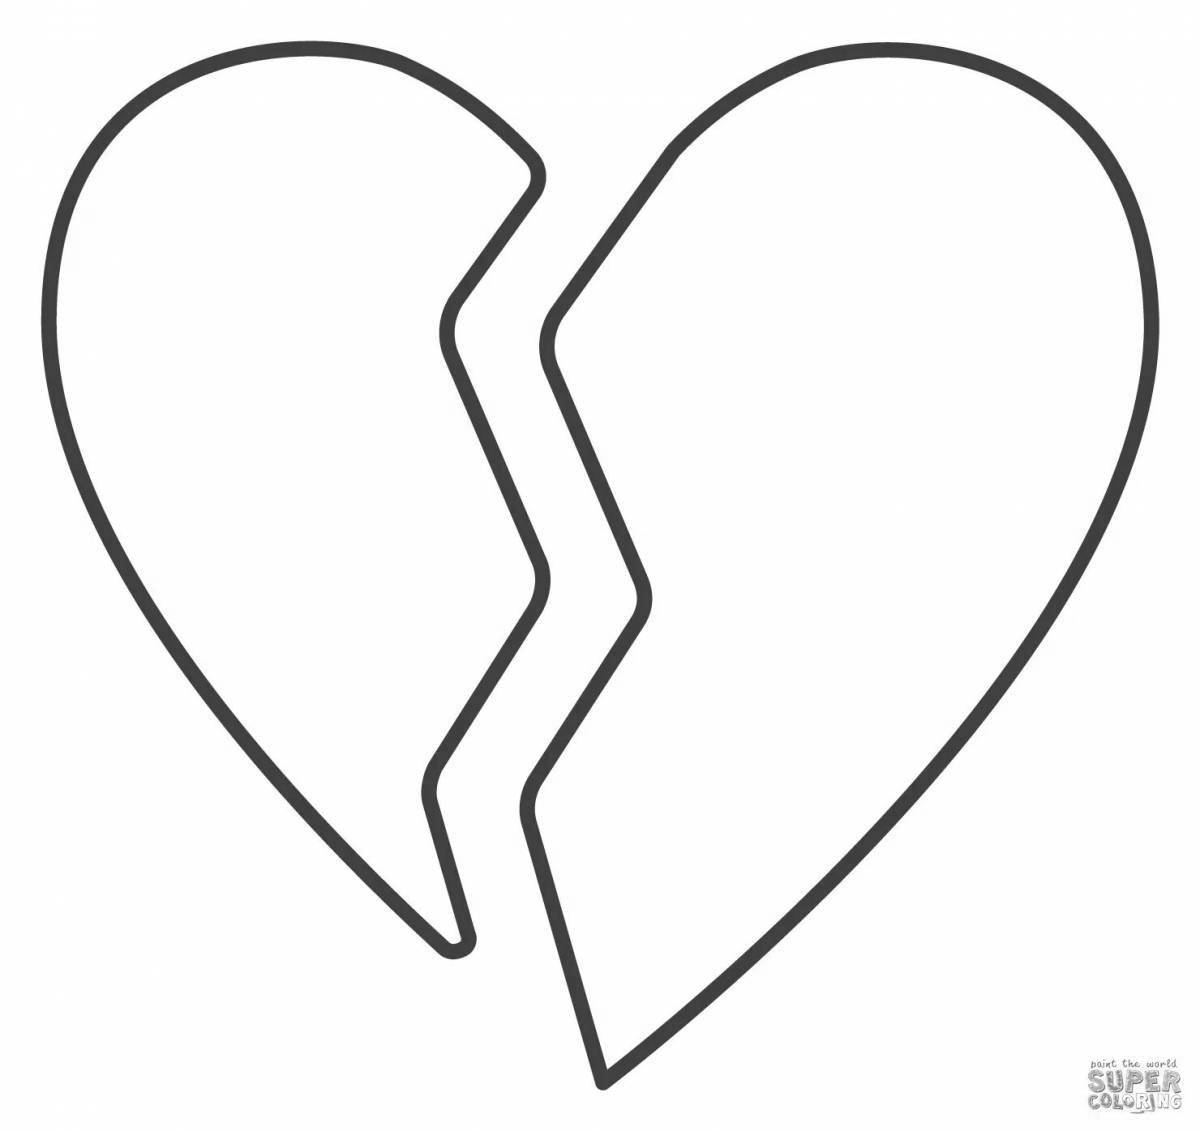 Amazing coloring pages with hearts